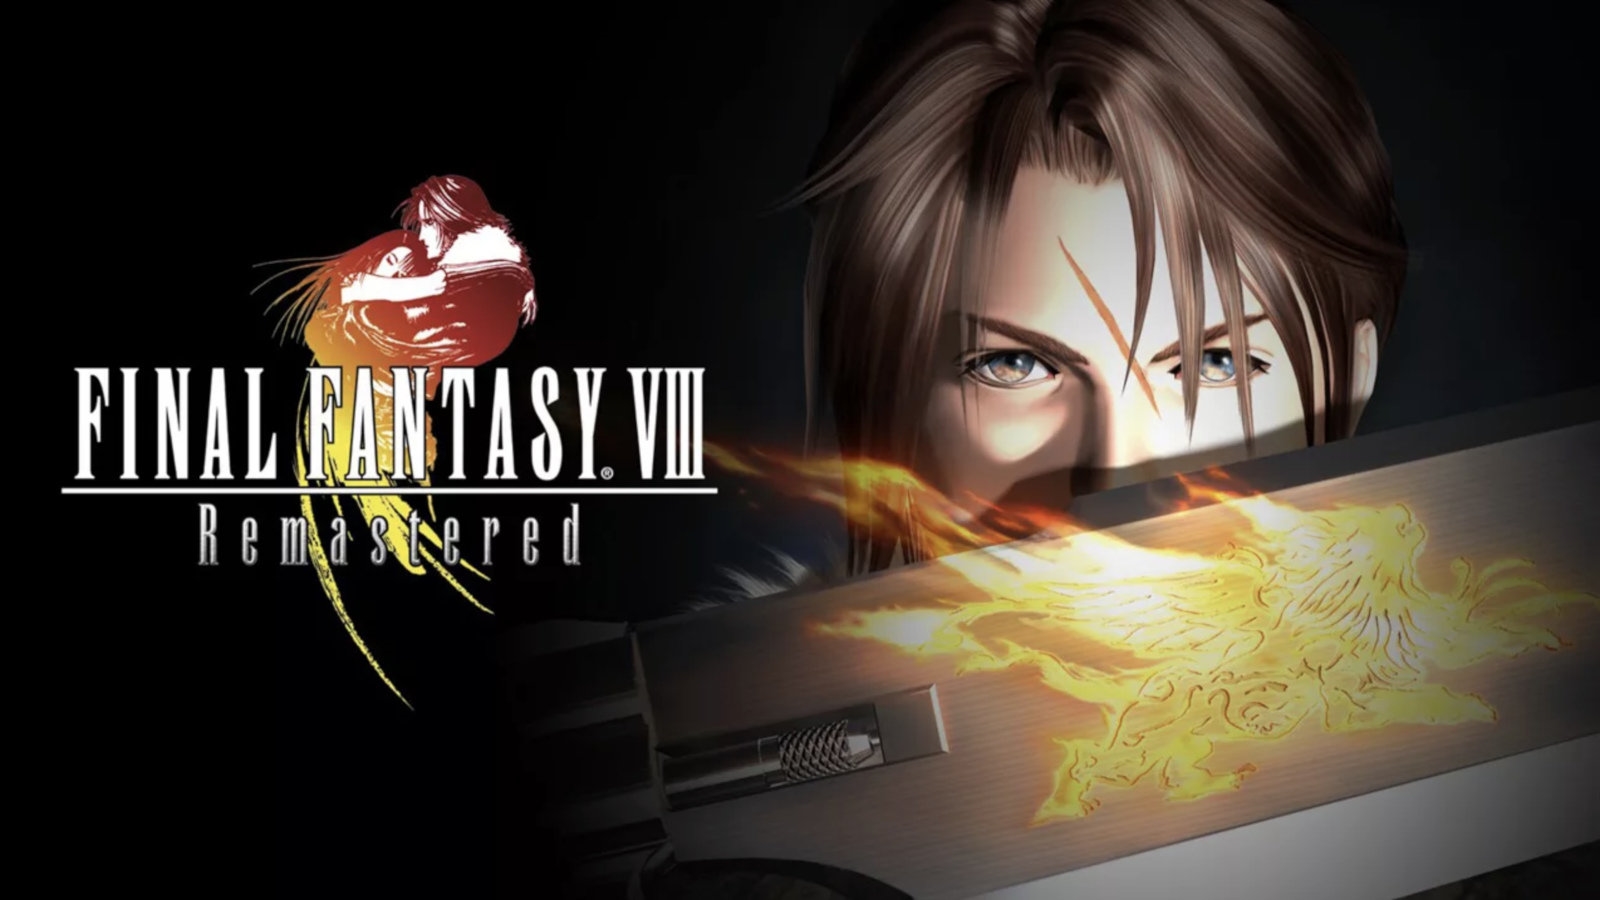 'Final Fantasy VIII' Remastered is coming out on September 3rd | DeviceDaily.com